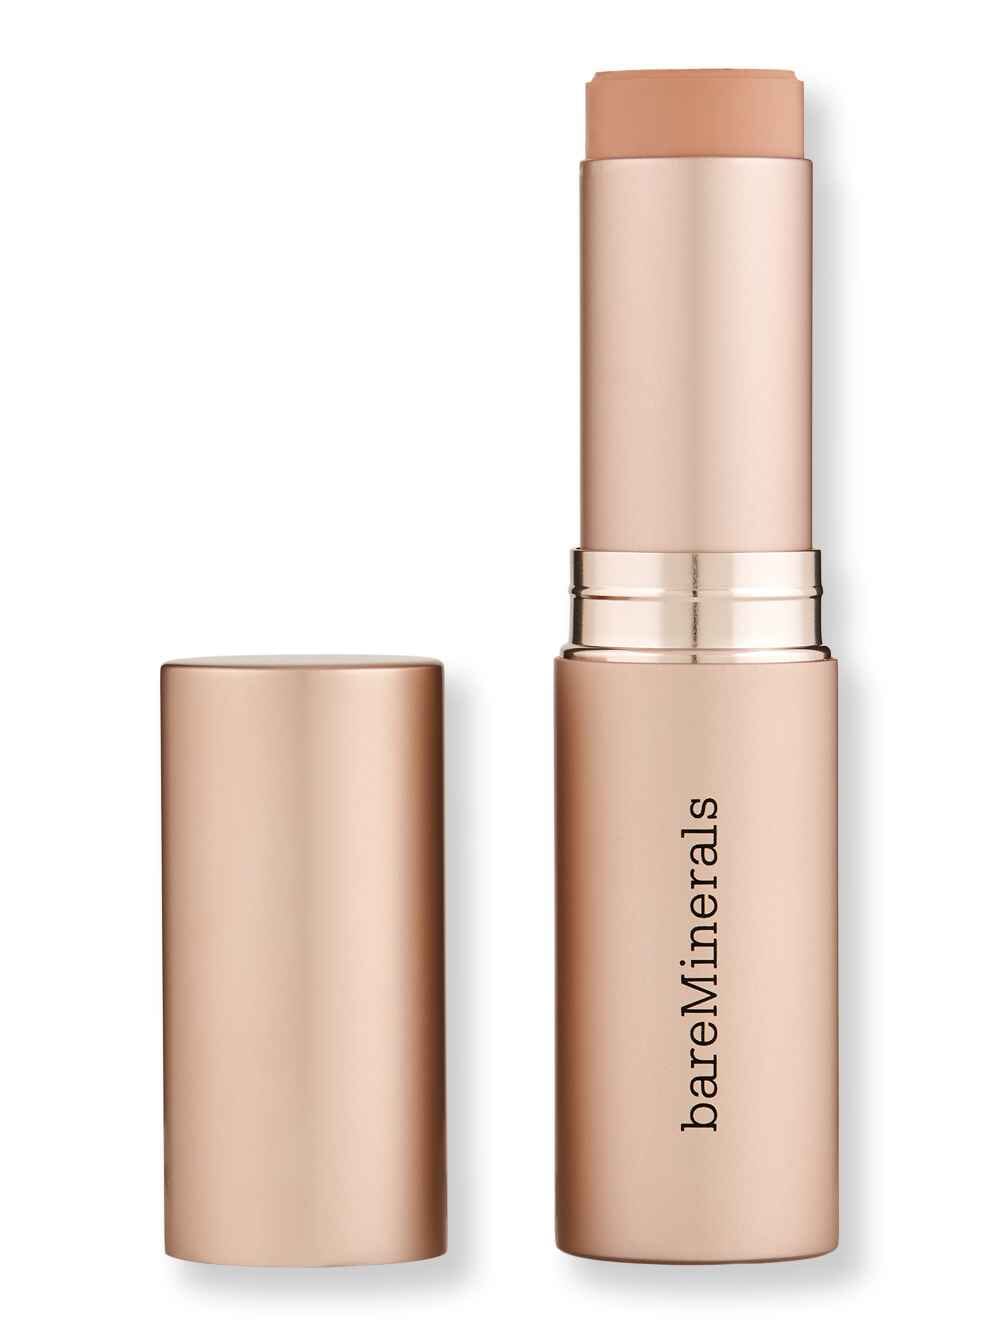 Bareminerals Bareminerals Complexion Rescue Hydrating Foundation Stick SPF25 Cashew 3.5 0.35 oz10 g Tinted Moisturizers & Foundations 